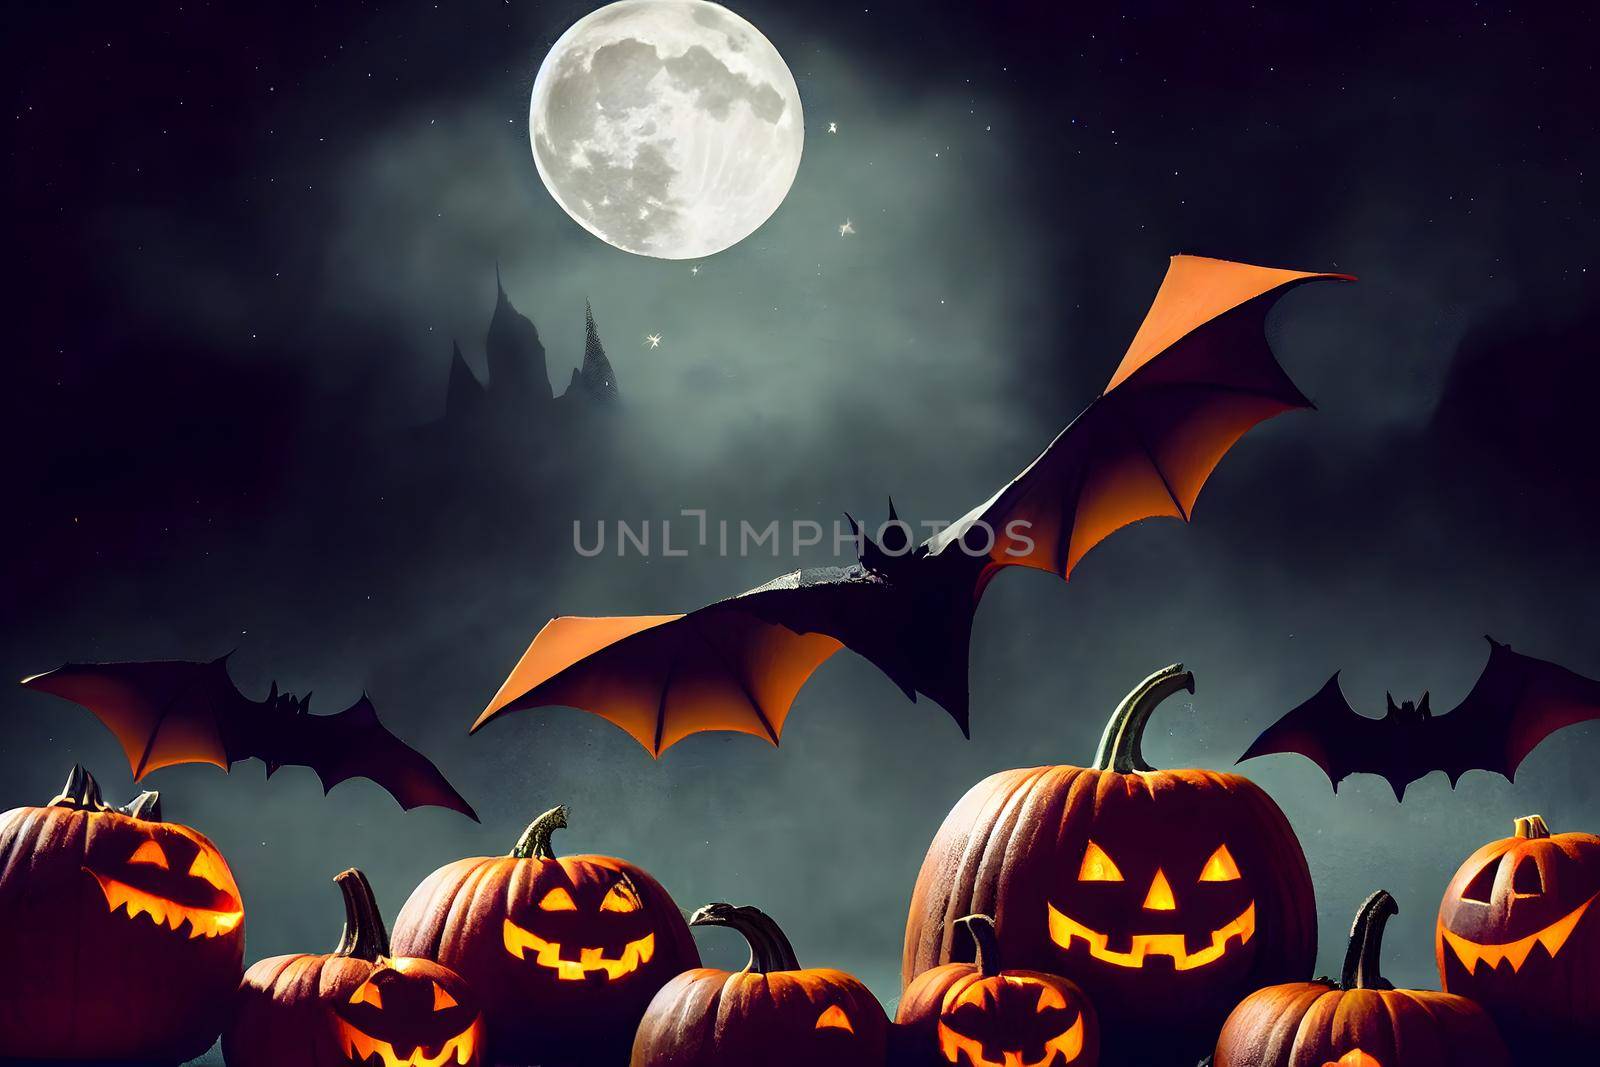 halloween aesthetic background, bats, pumpkins, full moon and stars night, neural network generated art by z1b